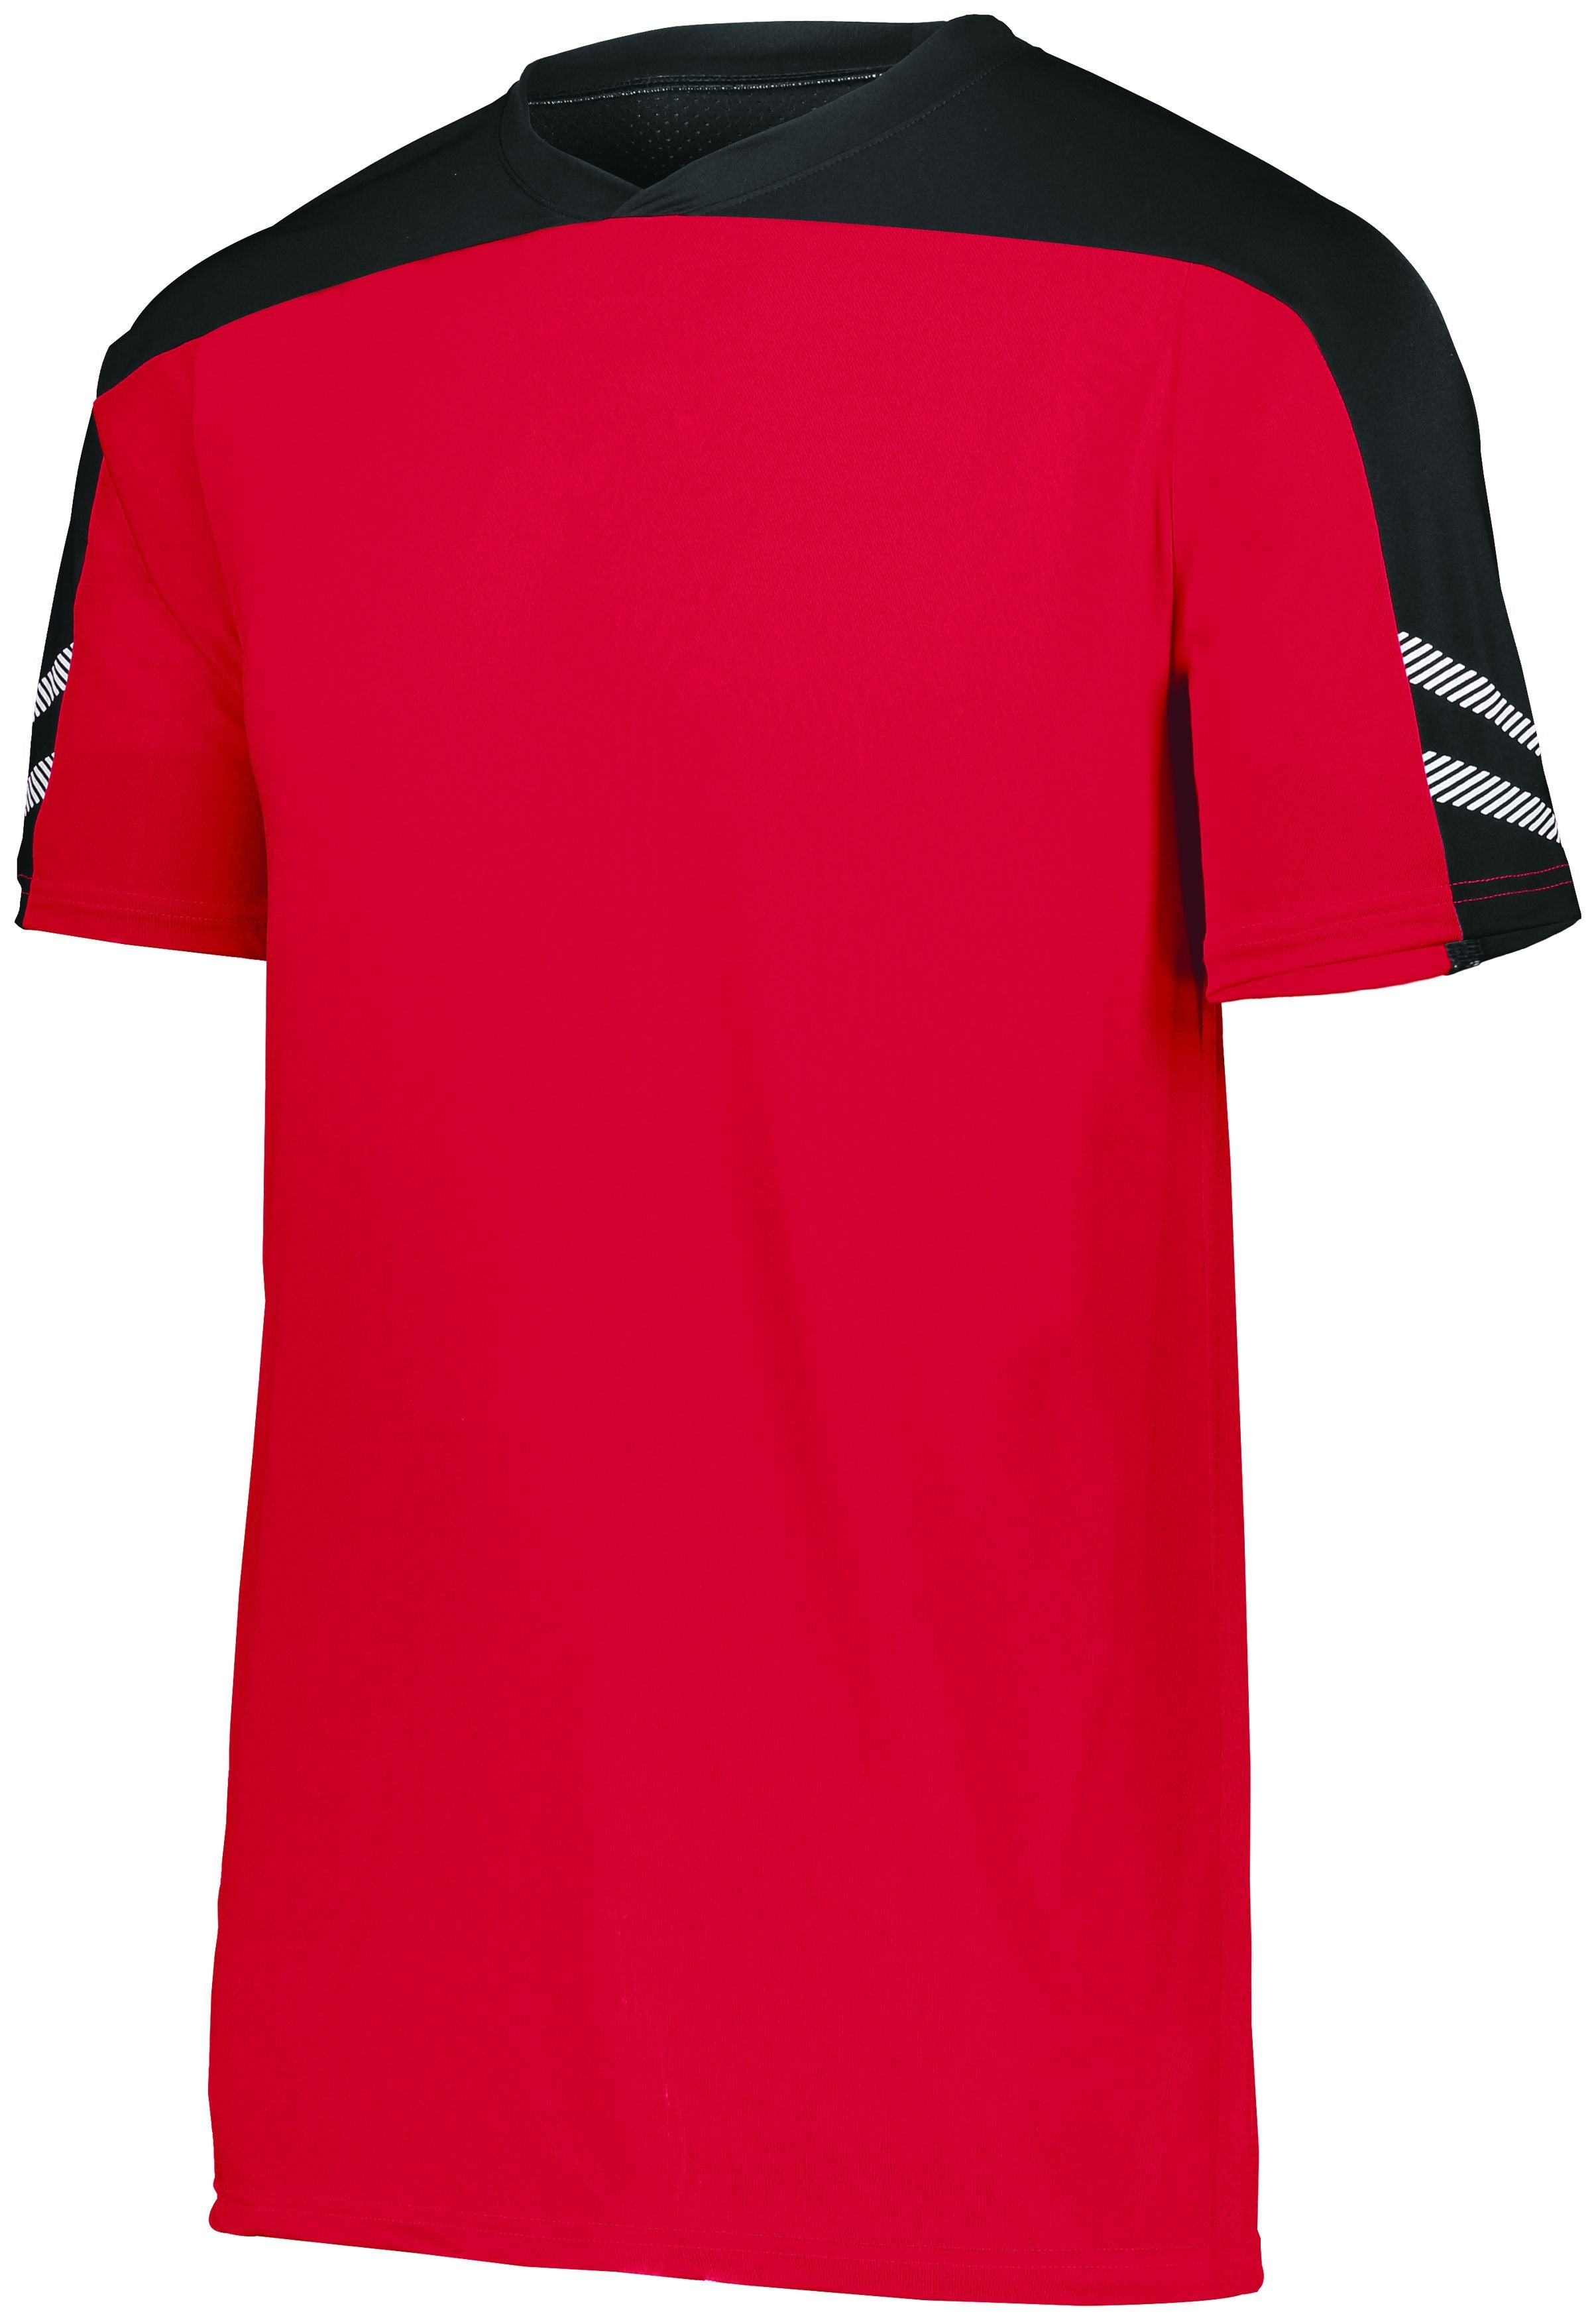 High 5 Youth Anfield Soccer Jersey in Scarlet/Black/White  -Part of the Youth, Youth-Jersey, High5-Products, Soccer, Shirts, All-Sports-1 product lines at KanaleyCreations.com